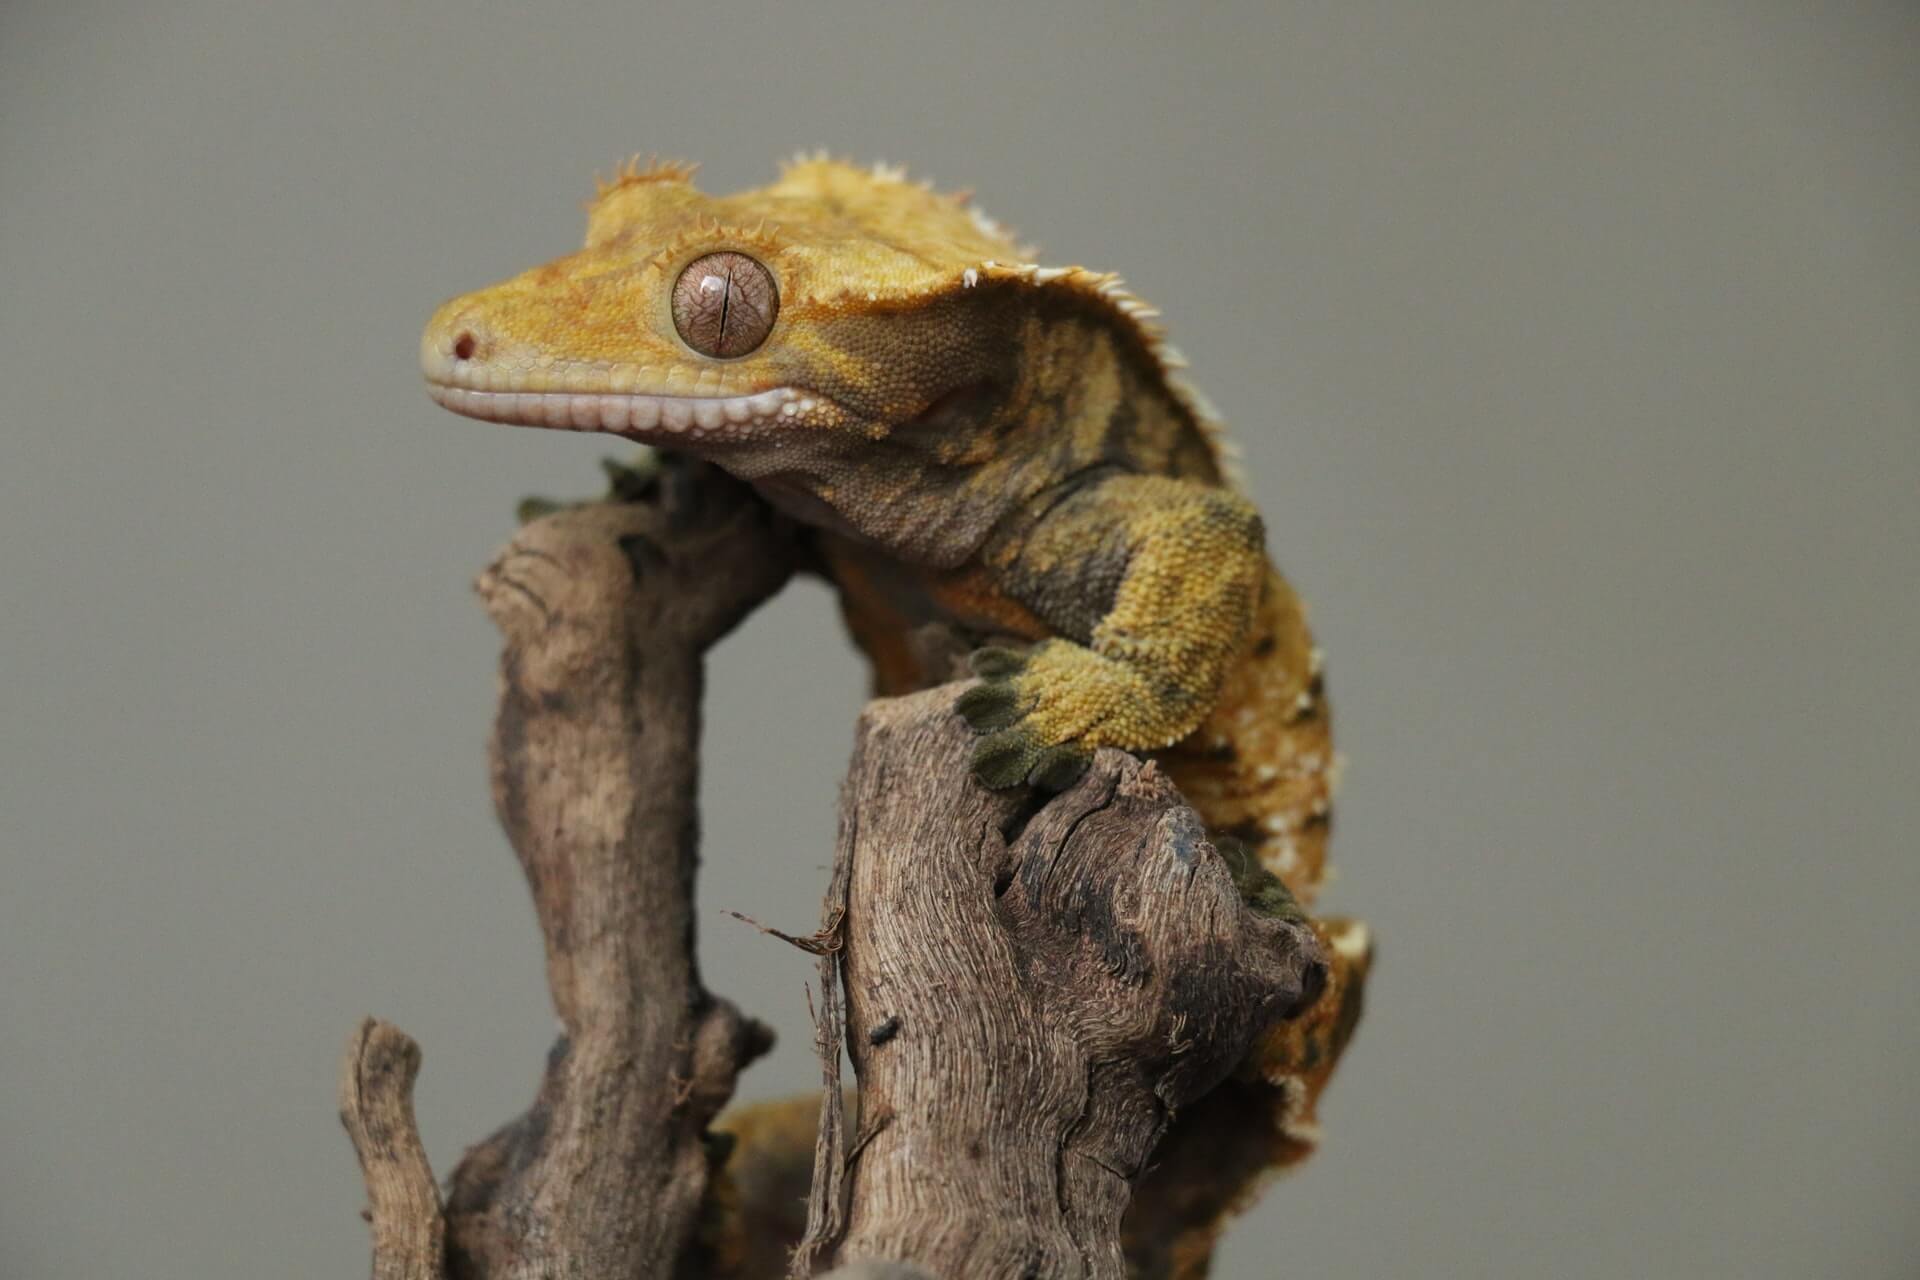 Can crested geckos live with other reptiles?